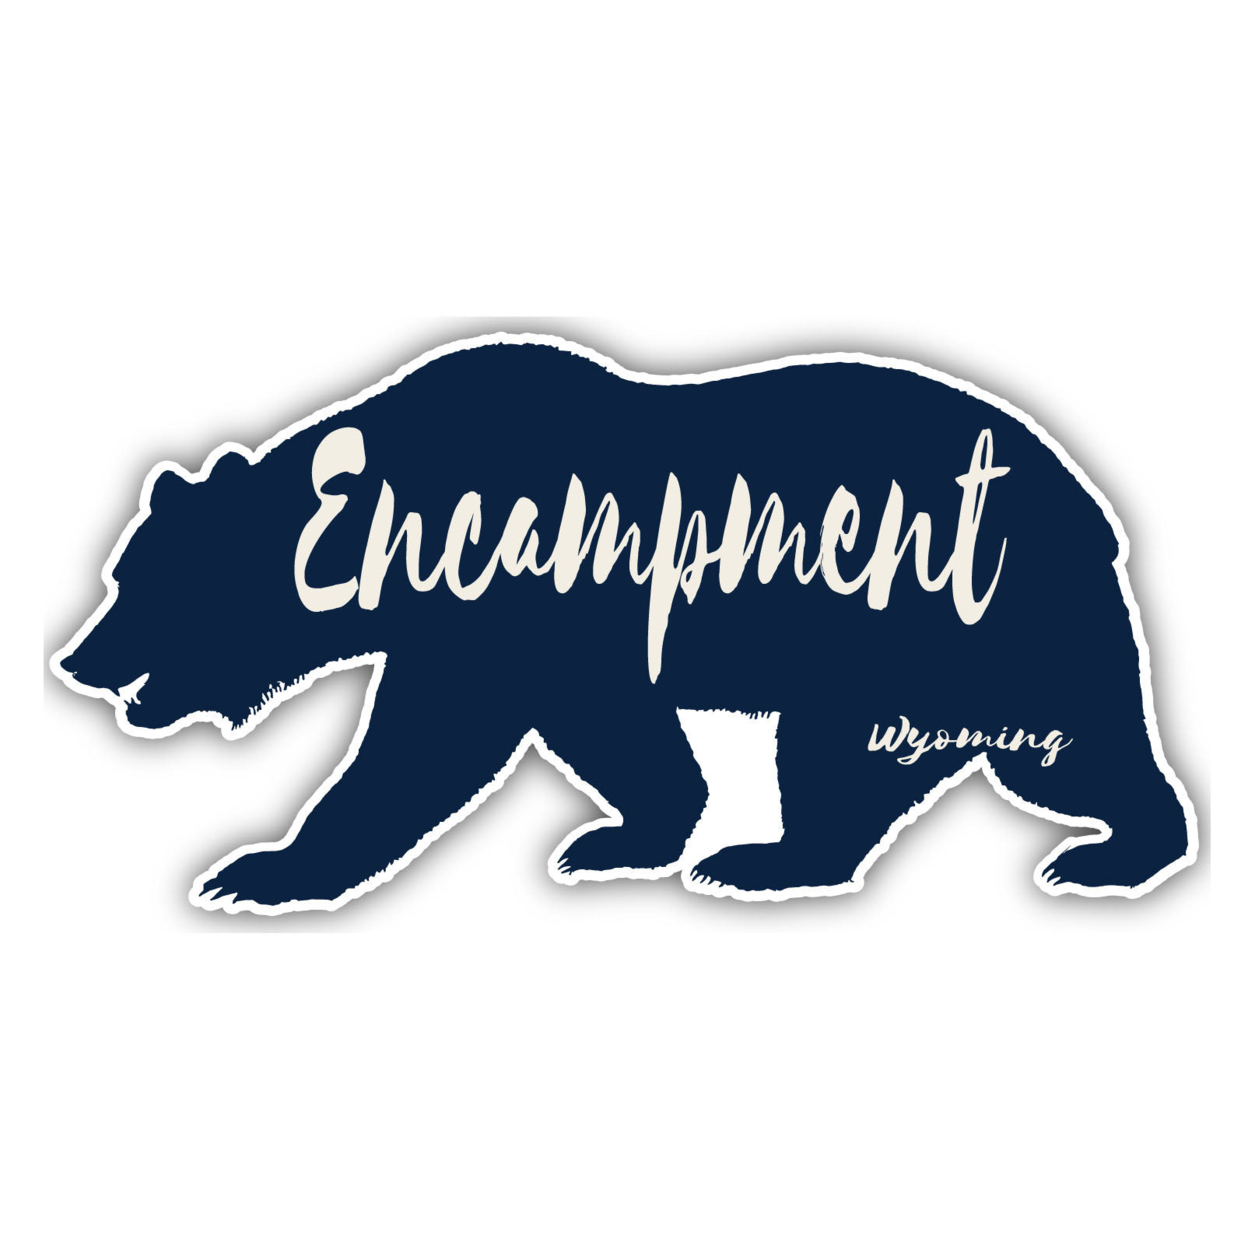 Encampment Wyoming Souvenir Decorative Stickers (Choose Theme And Size) - 4-Pack, 8-Inch, Bear